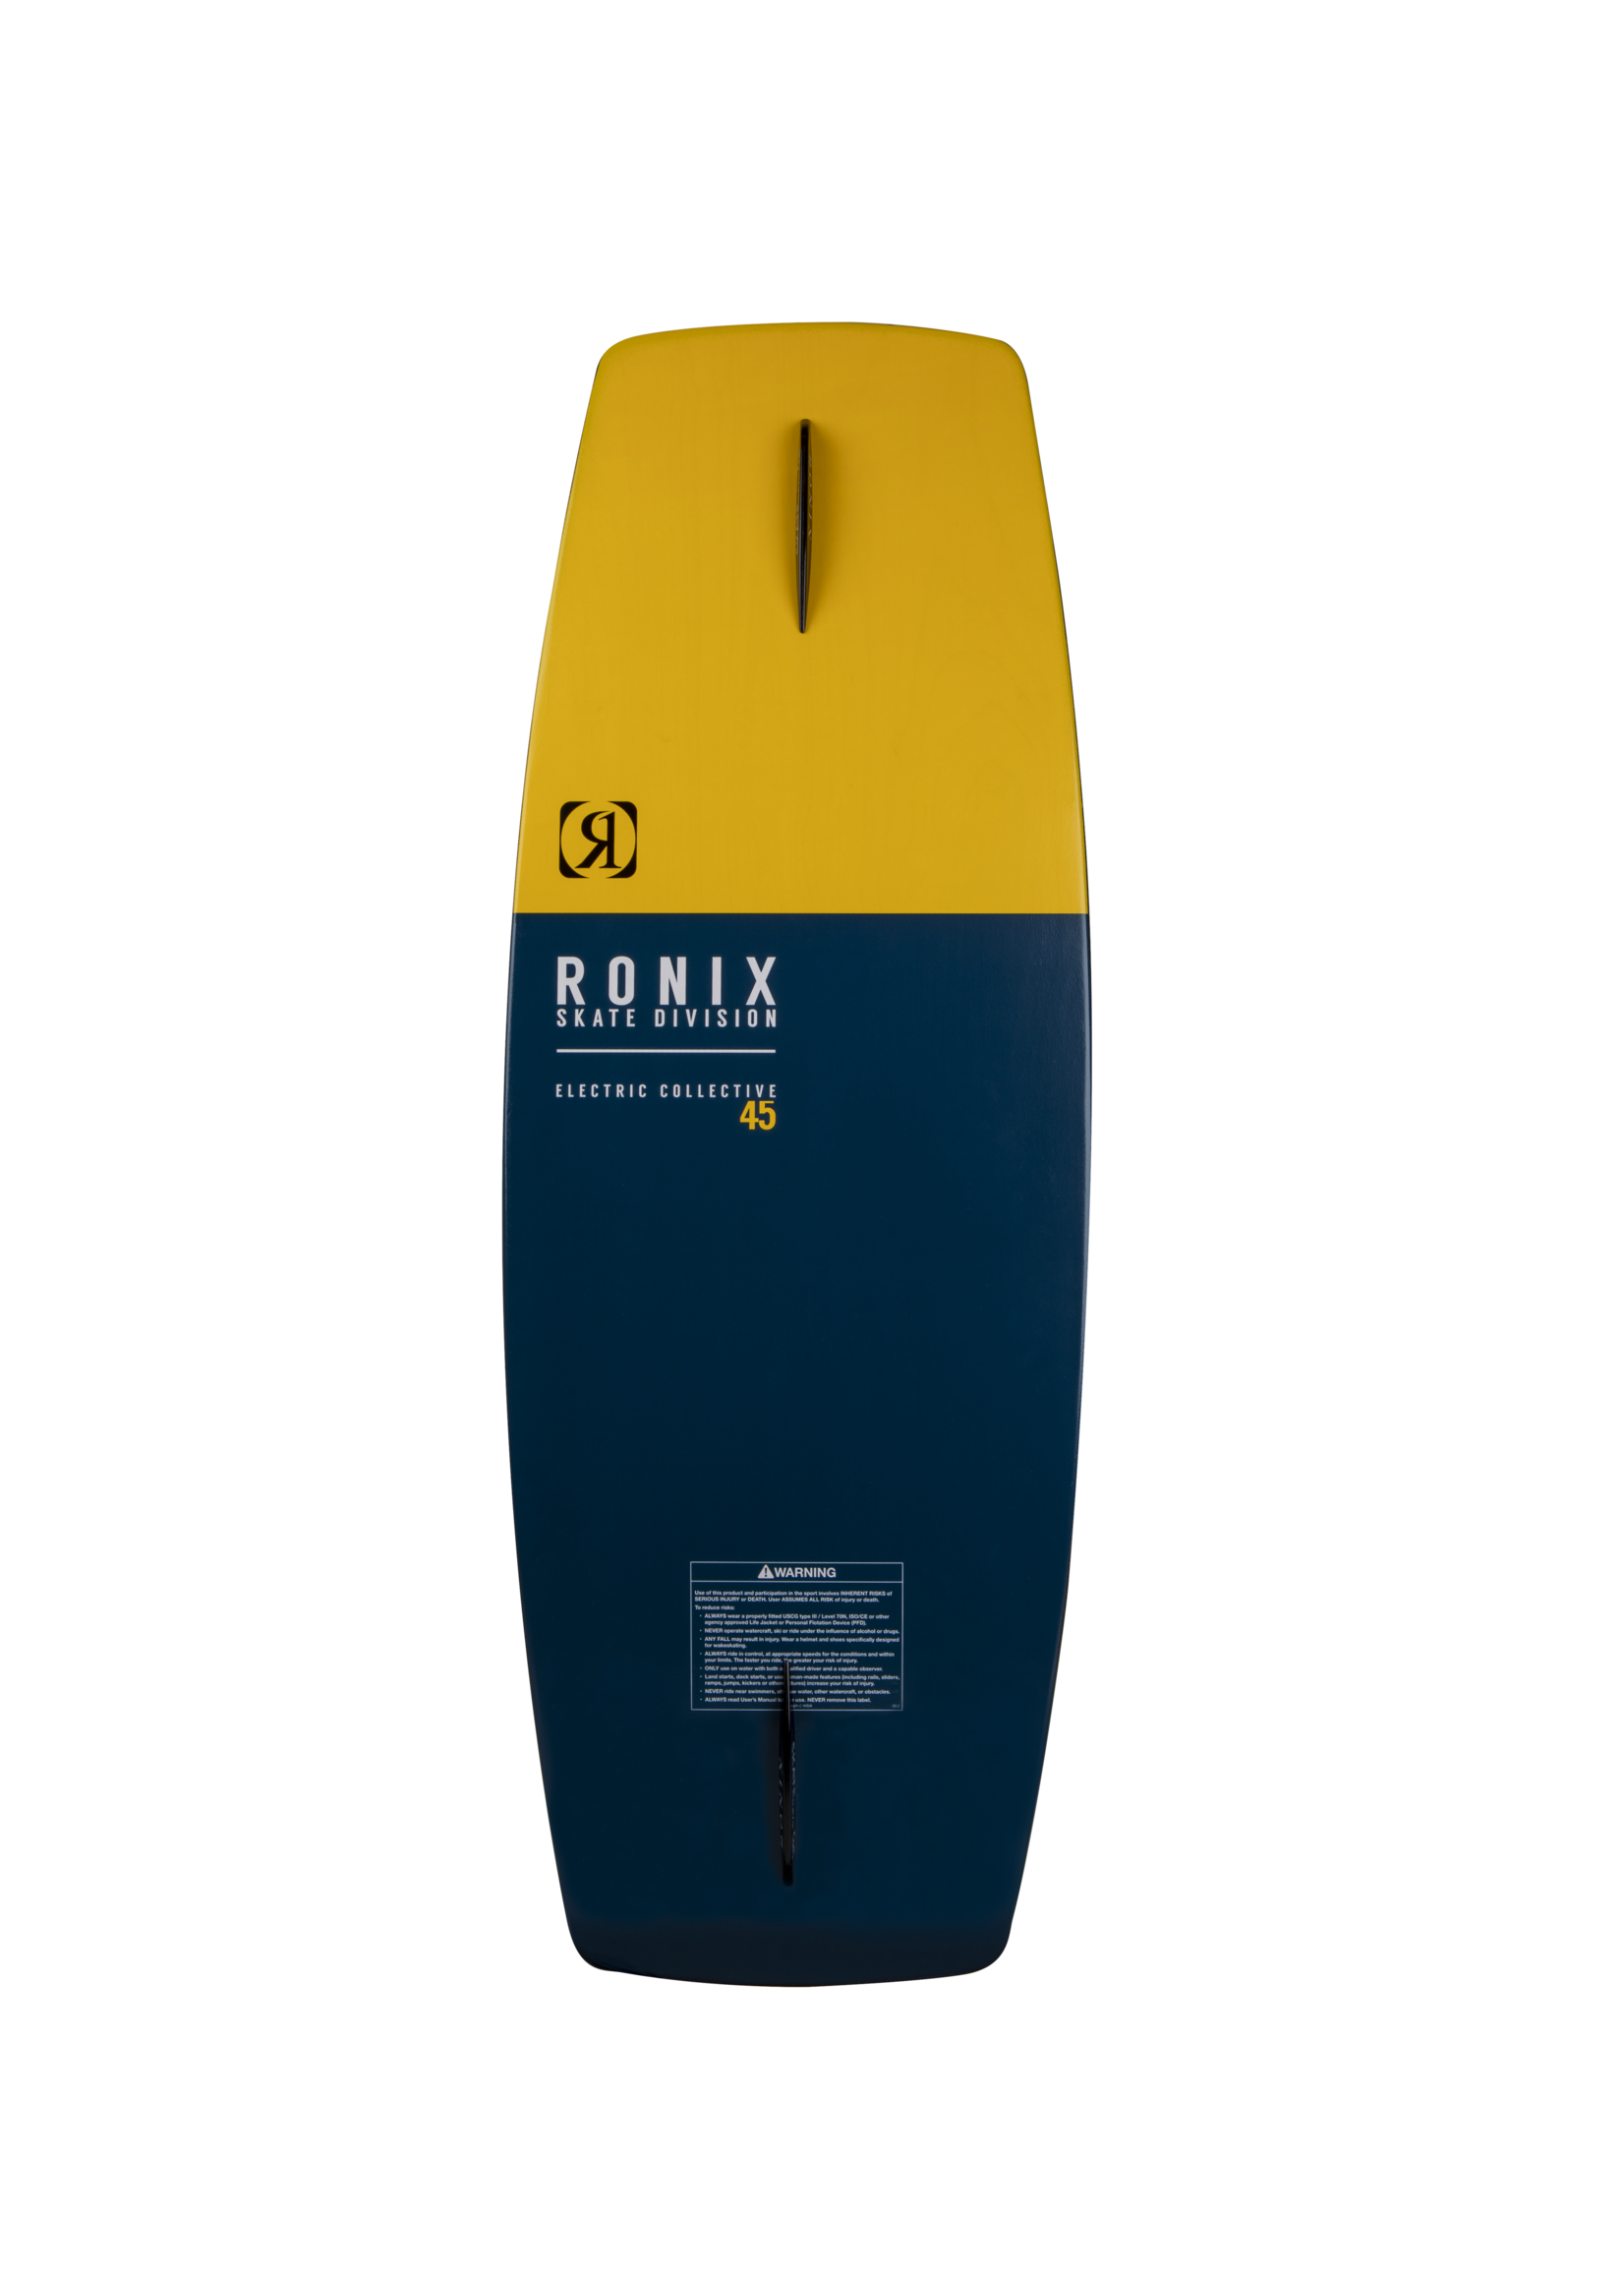 Ronix ELECTRIC COLLECTIVE